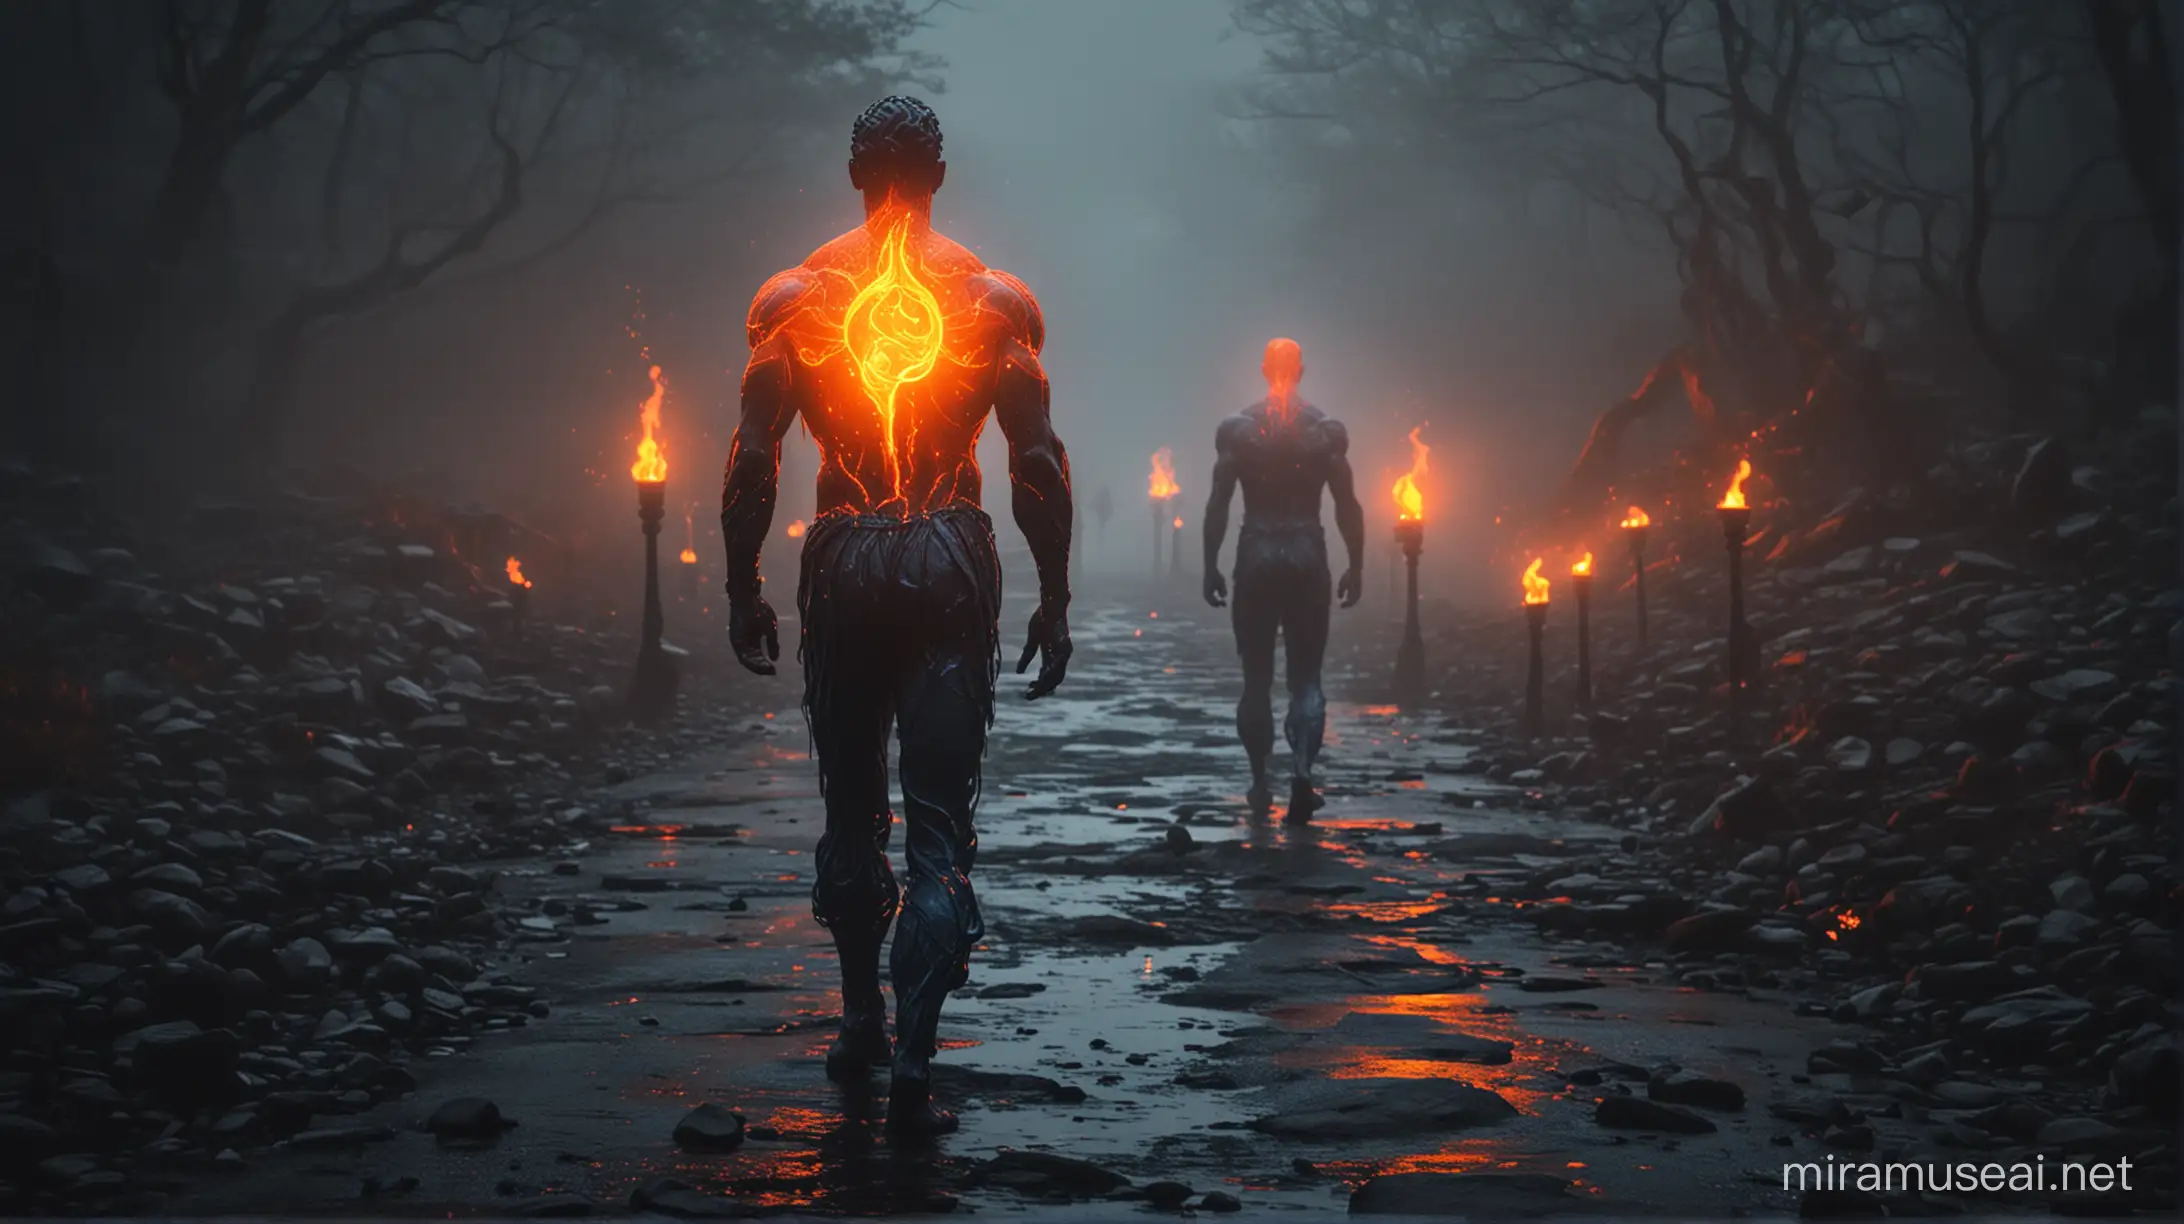 Stoicism, motivation, stoic muscular FIGURE outdoors, next to him a source of water, connected with lava burning sun the image has red blue and orange glows the figure
and it's dark
he walks along the road and there are atmospheric lamps on the sides, the figure is supposed to be on his back and confidently walking forward